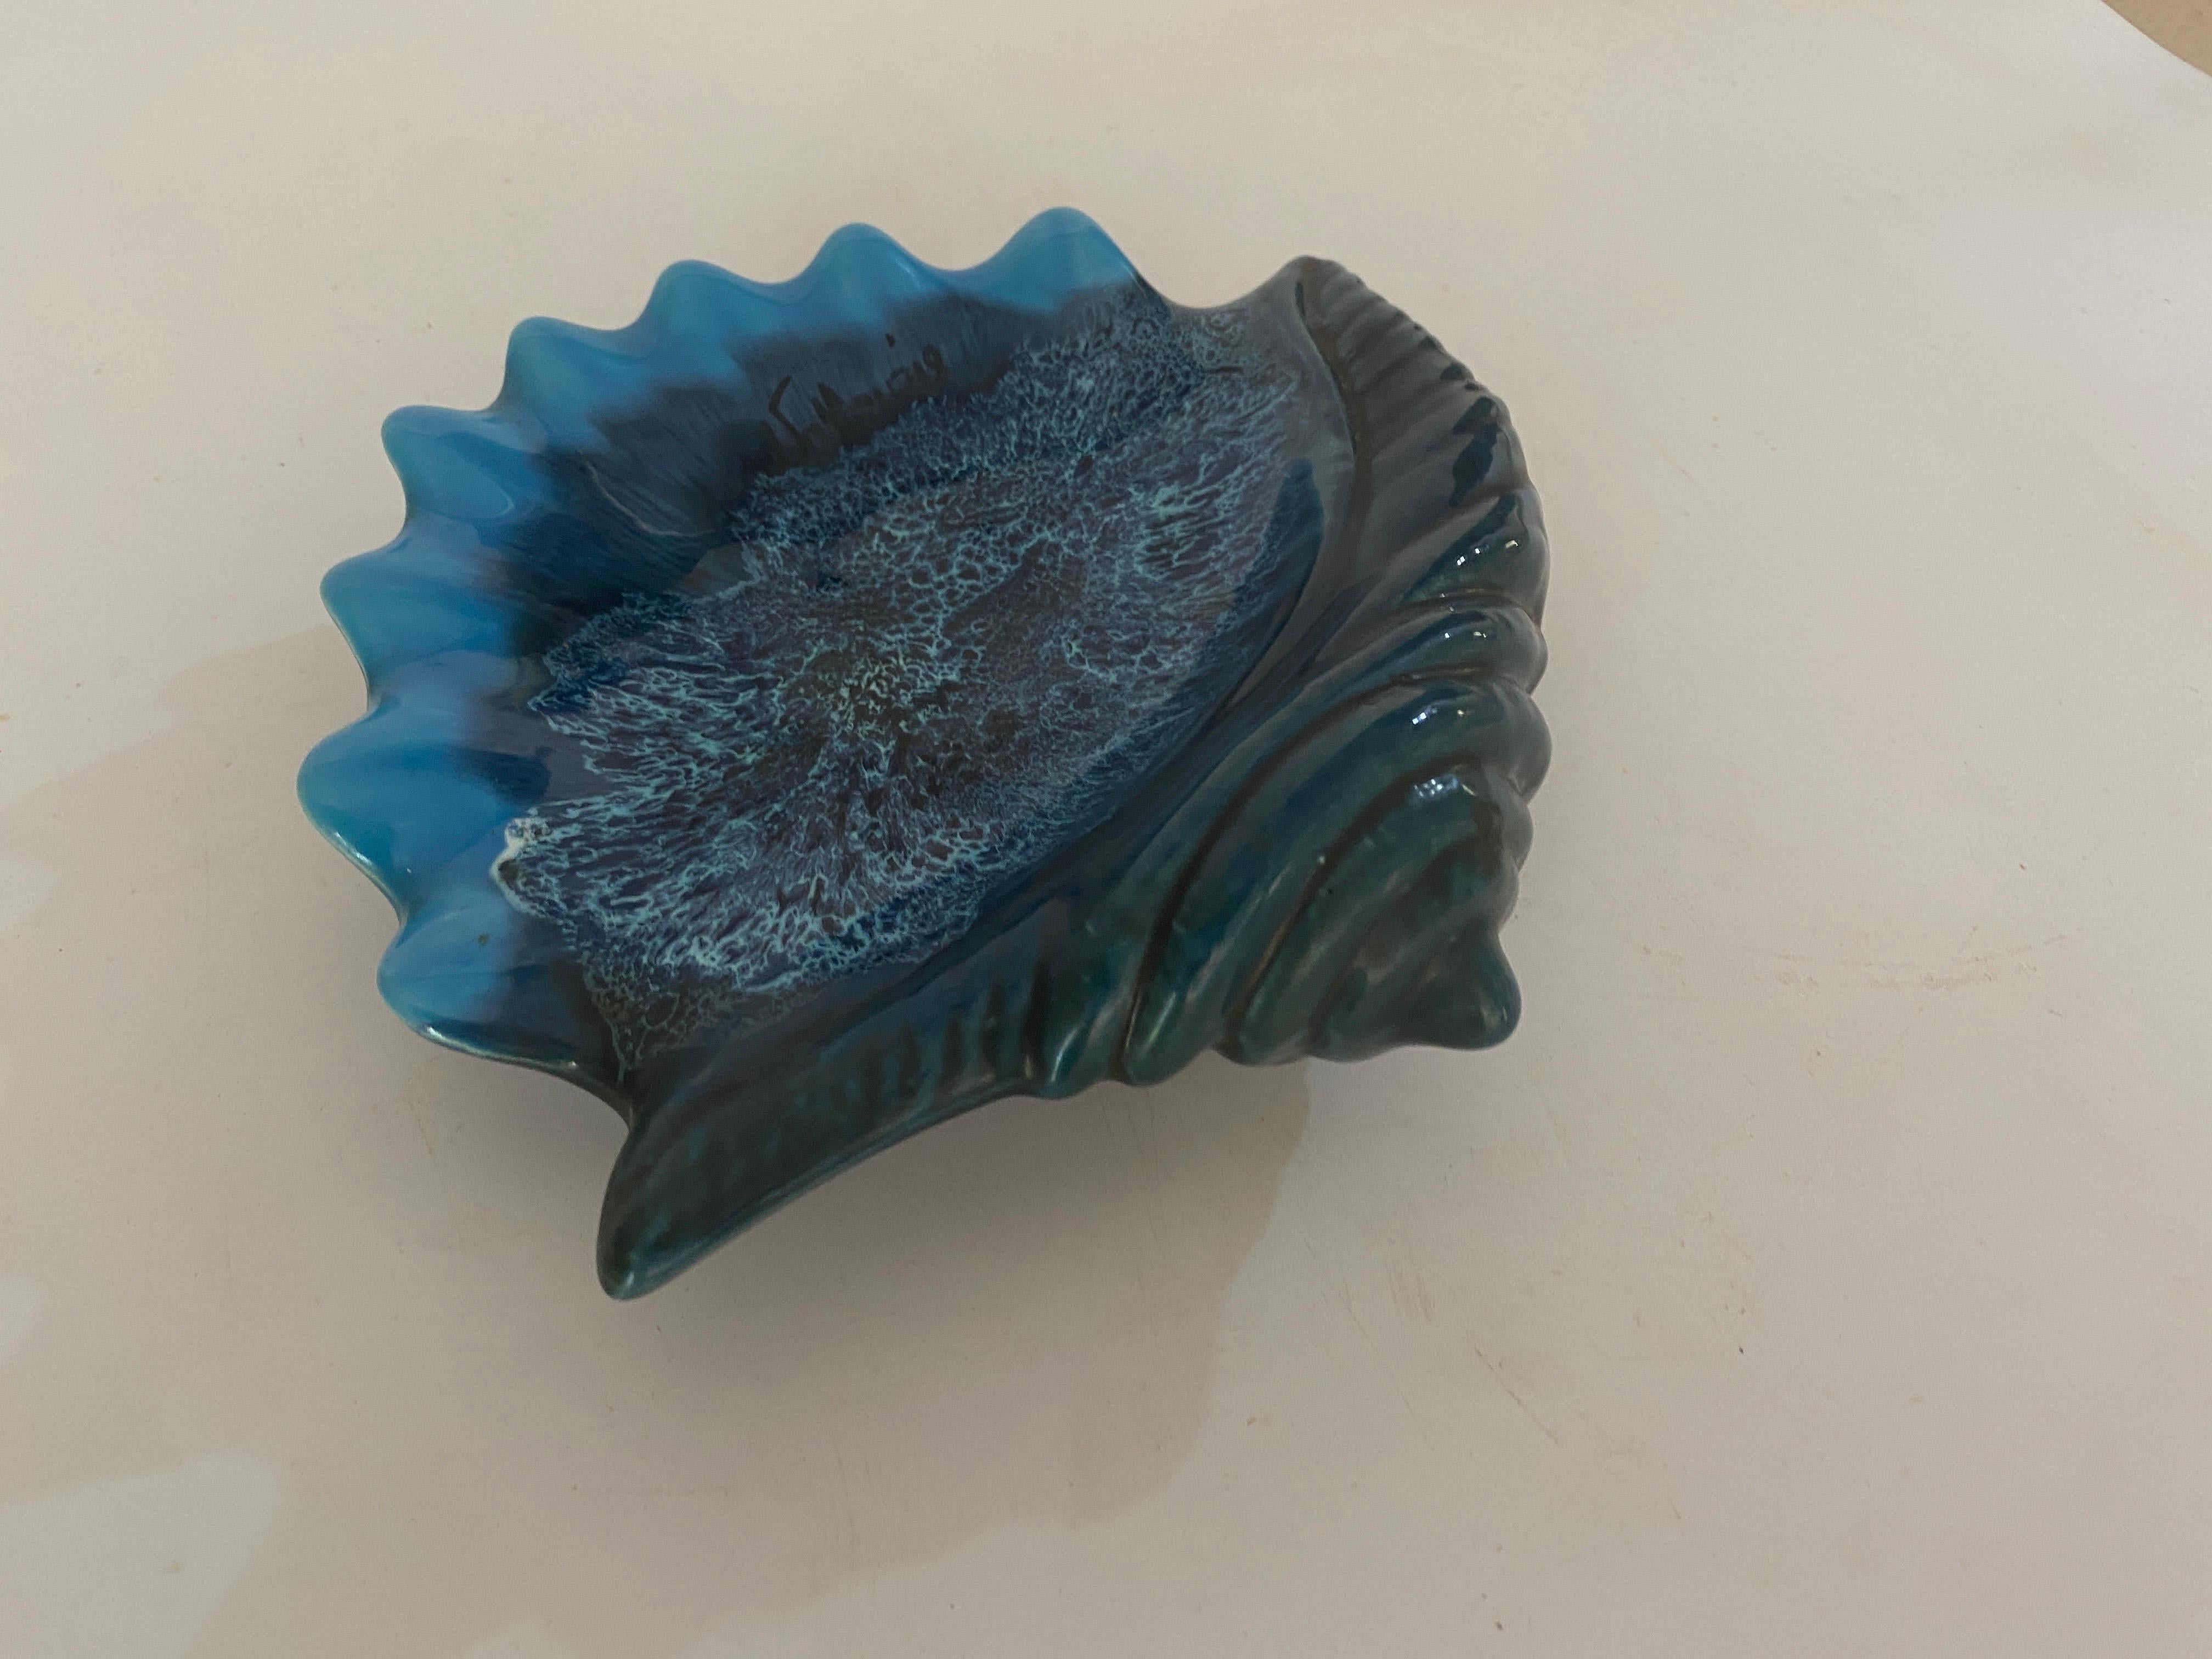 Mid-20th Century Ceramic Blue Ashtray or Vide Poche in a Shell Form Circa 1960 France For Sale